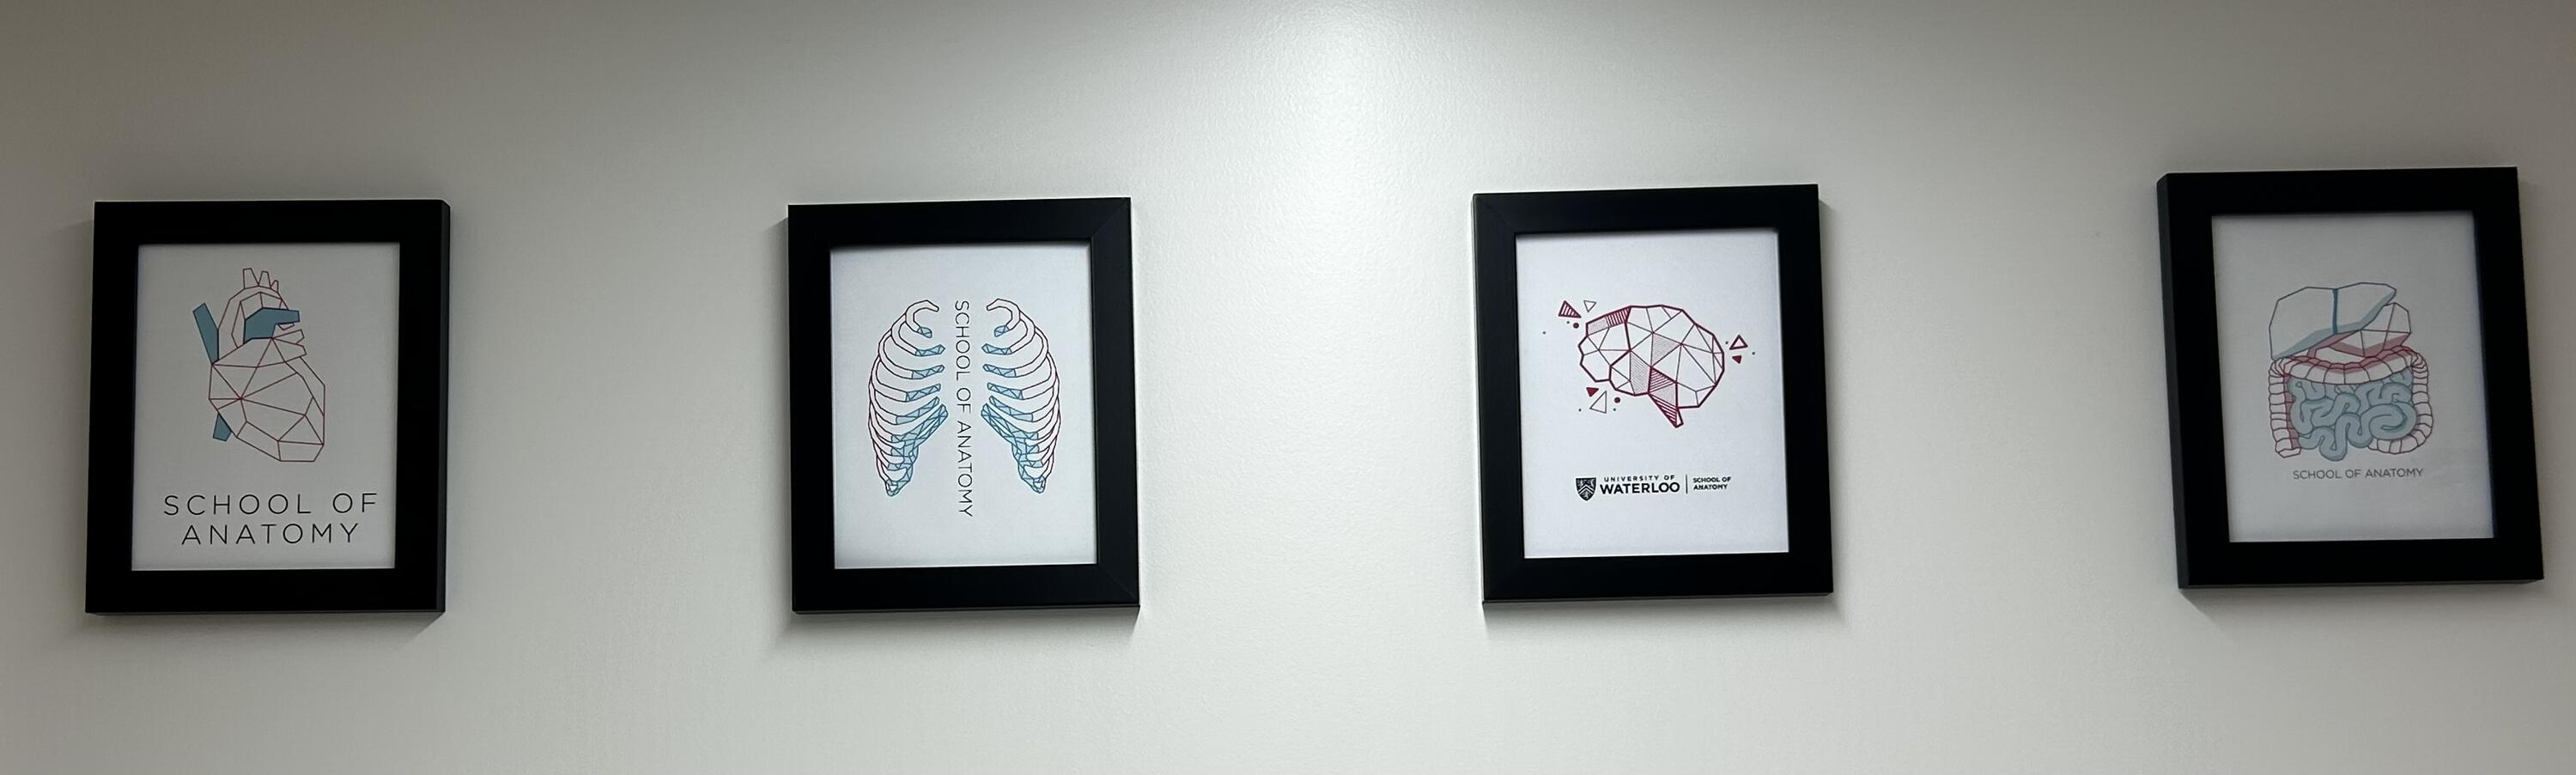 Wall art at the School of Anatomy.